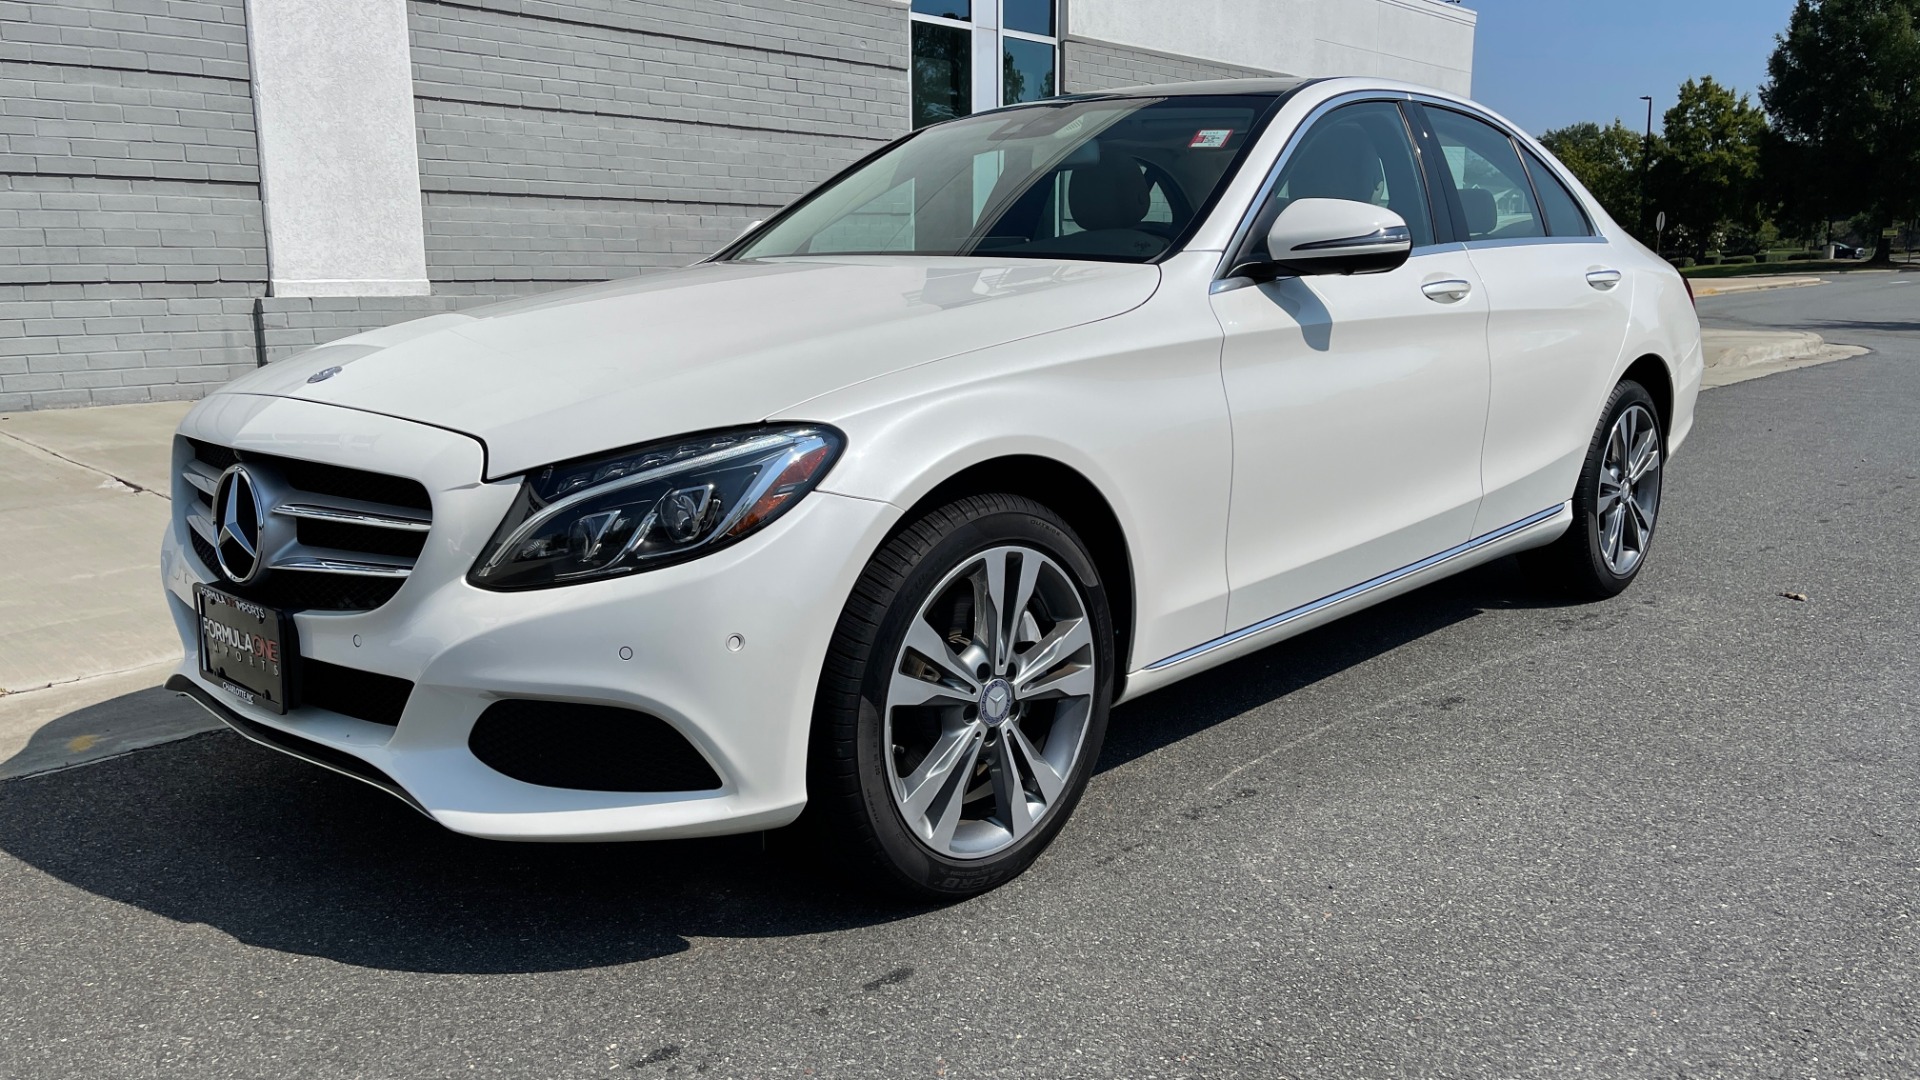 Used 2016 Mercedes-Benz C-CLASS C 300 4MATIC PREMIUM / BSA / MULTI MEDIA PKG / LIGHTING / REARVIEW for sale Sold at Formula Imports in Charlotte NC 28227 3